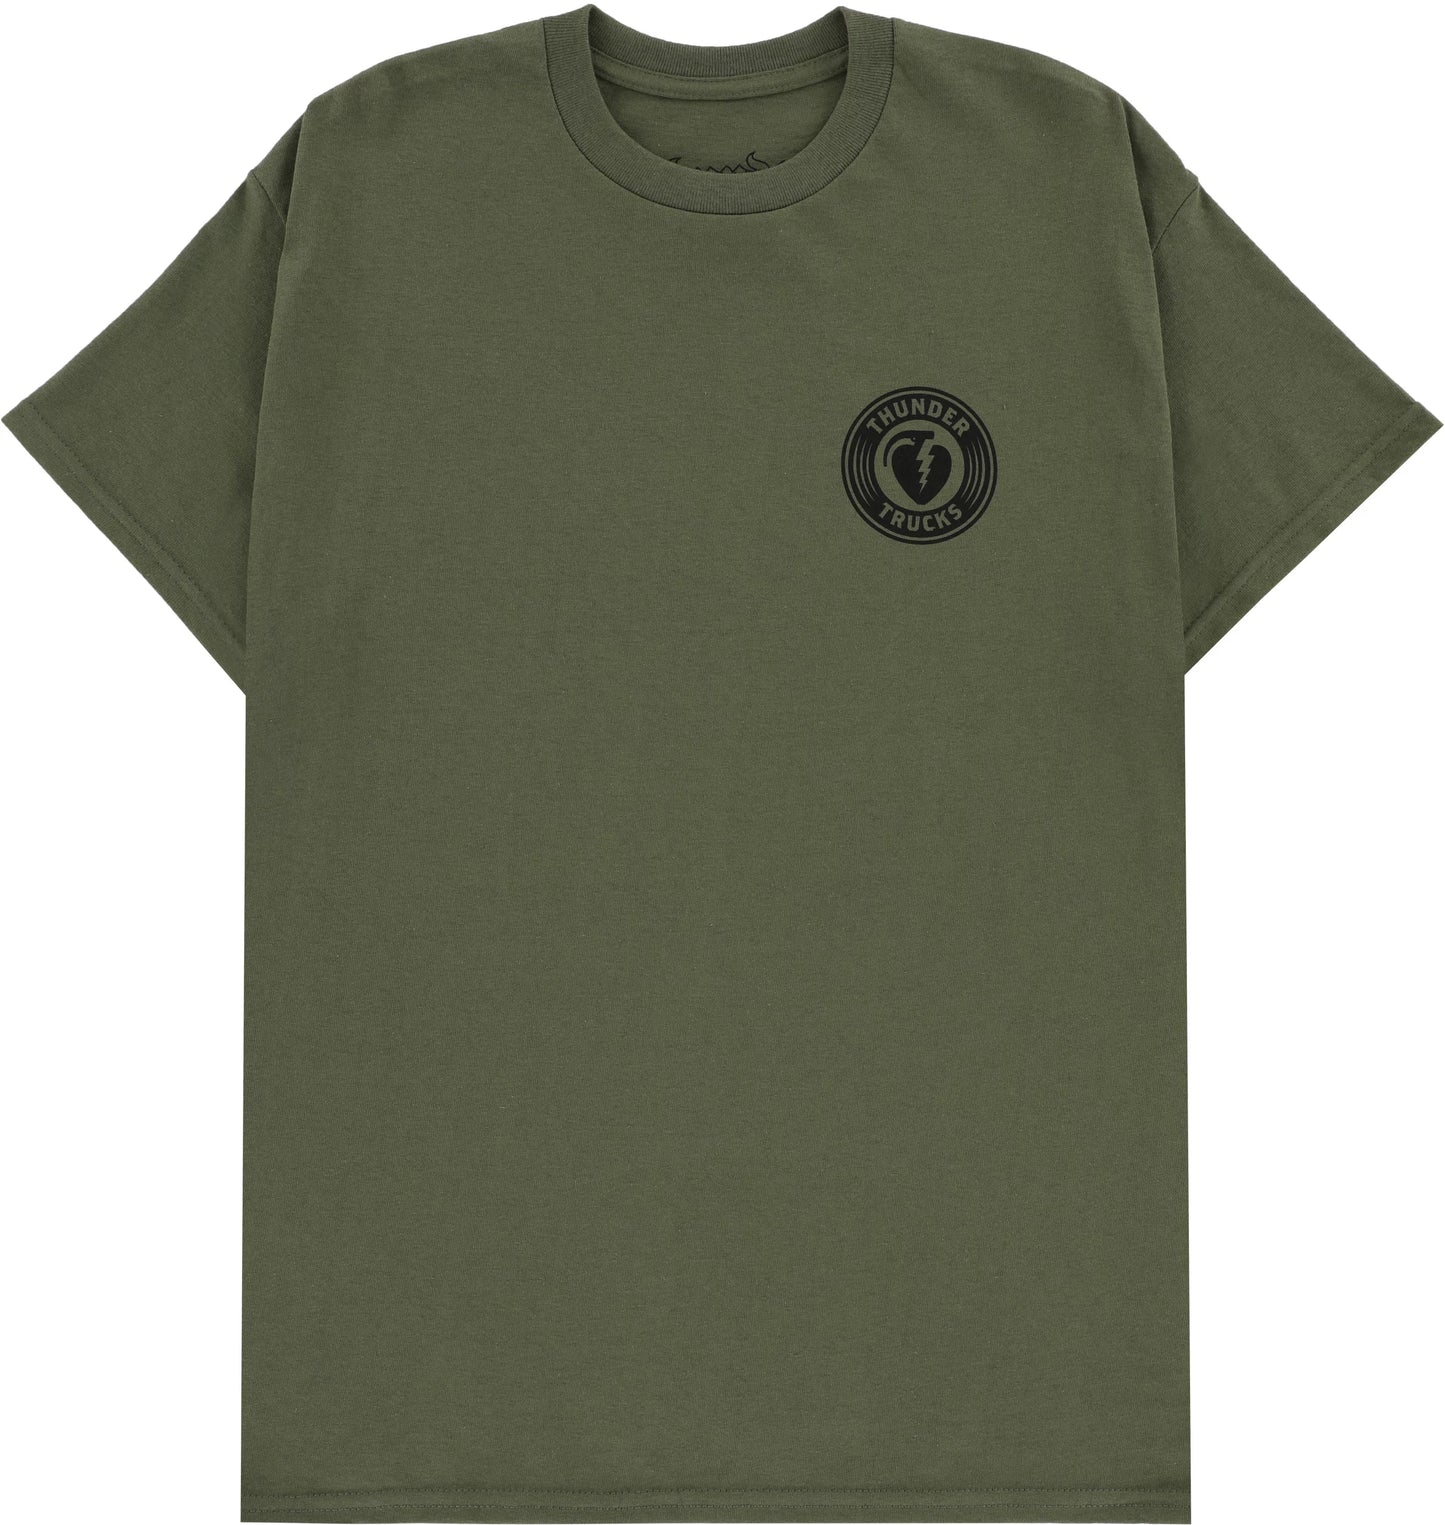 THUNDER - CHARGED GRENADE S/S TEE - MILITARY GREEN/BLACK